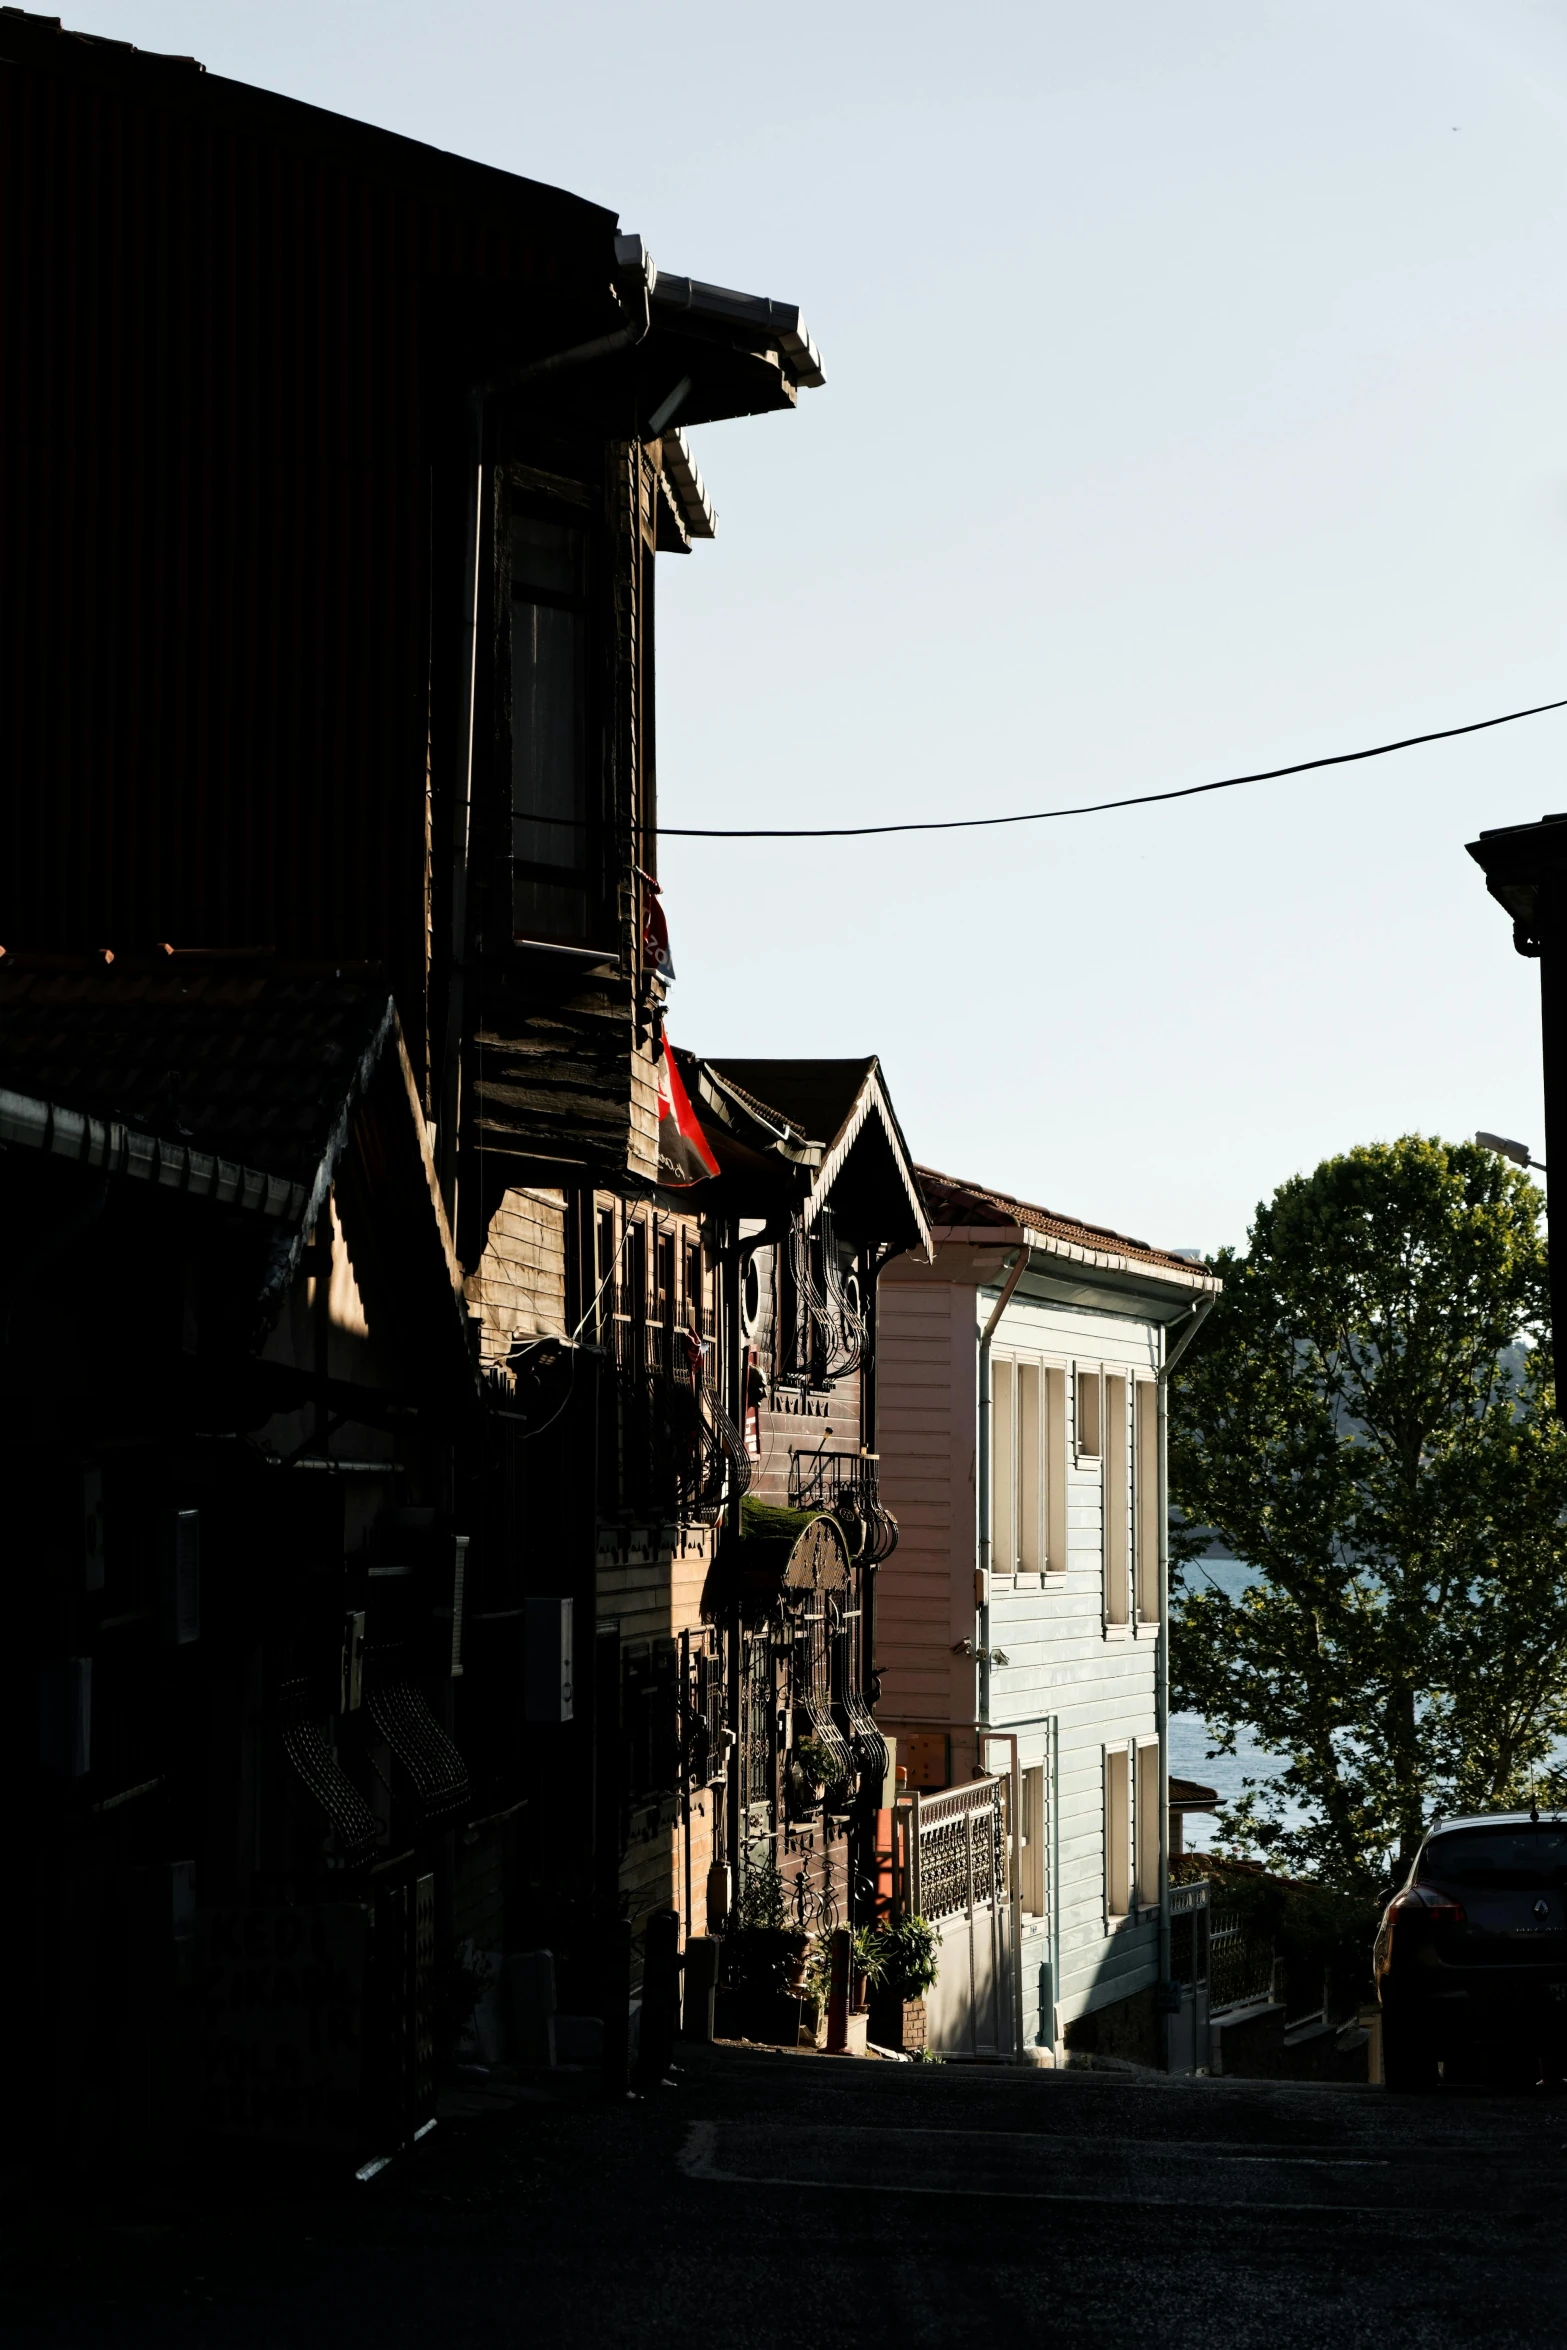 view of a residential area from an alleyway